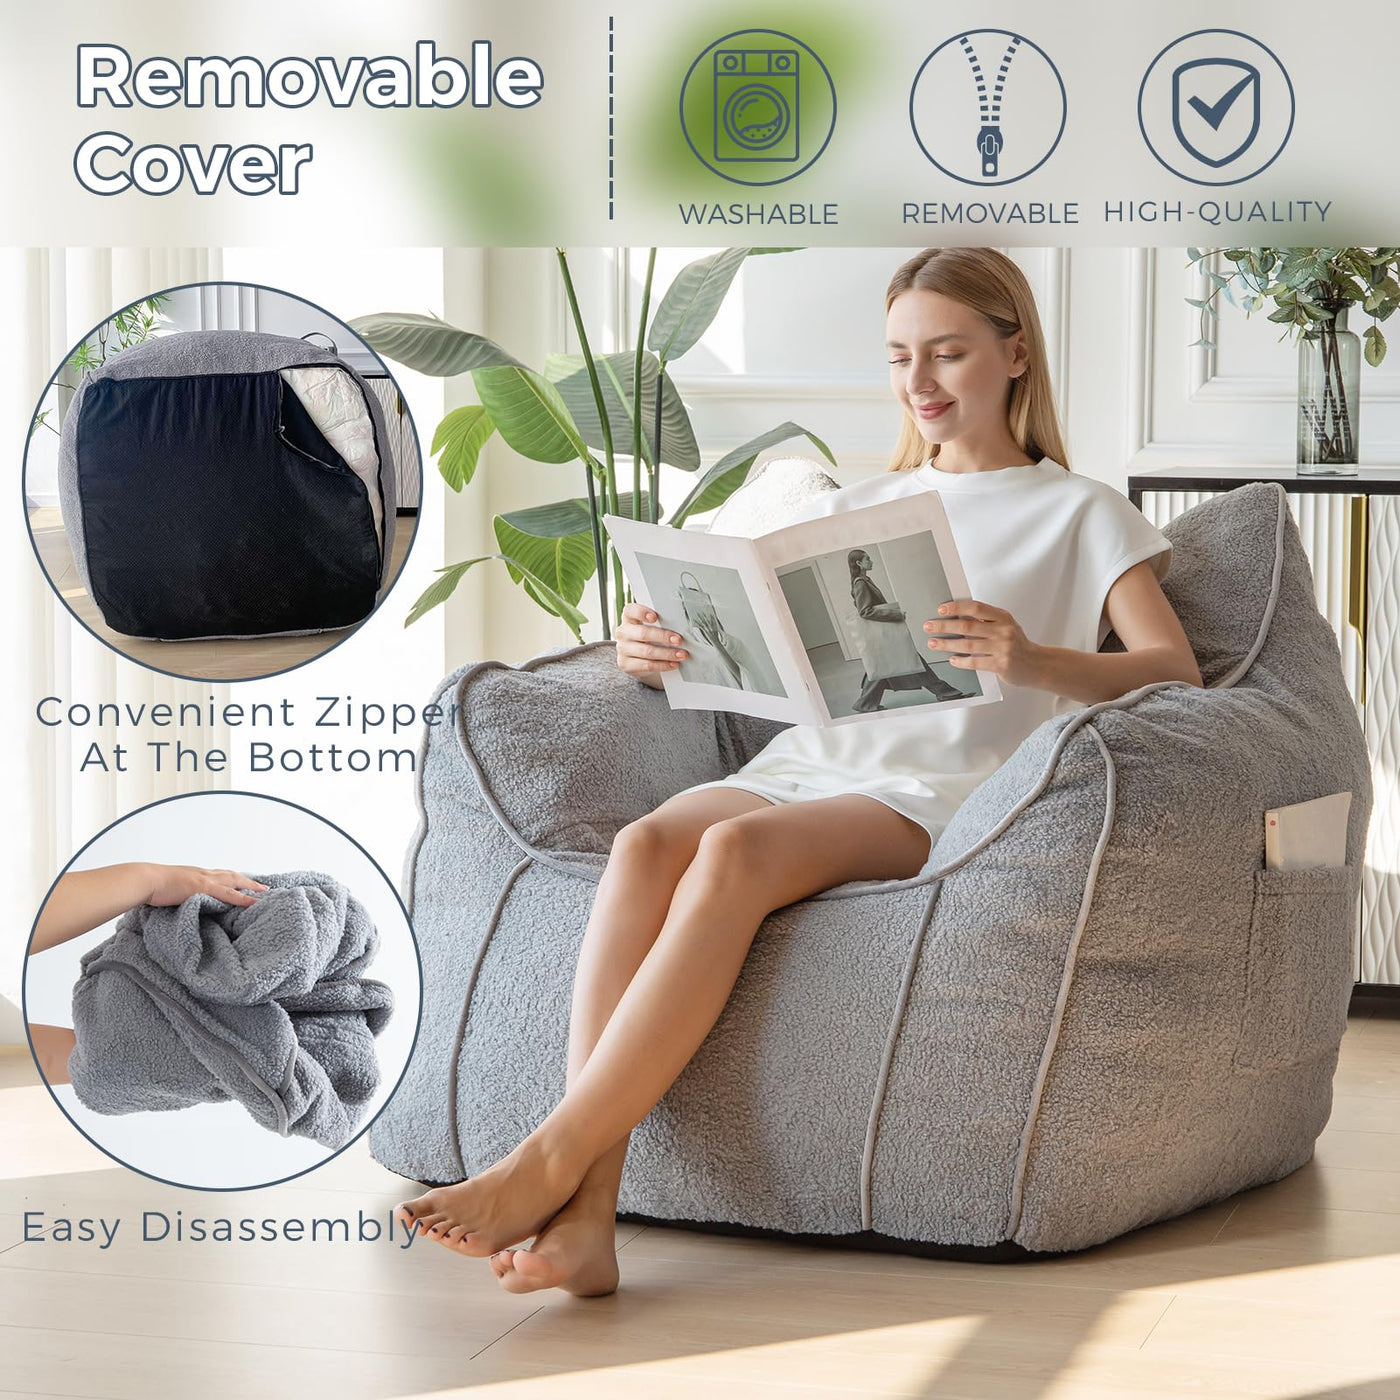 MAXYOYO Giant Bean Bag Chair for Adults, Large Fluffy Bean Bag Couch for Living Room with Decorative Edges, Grey